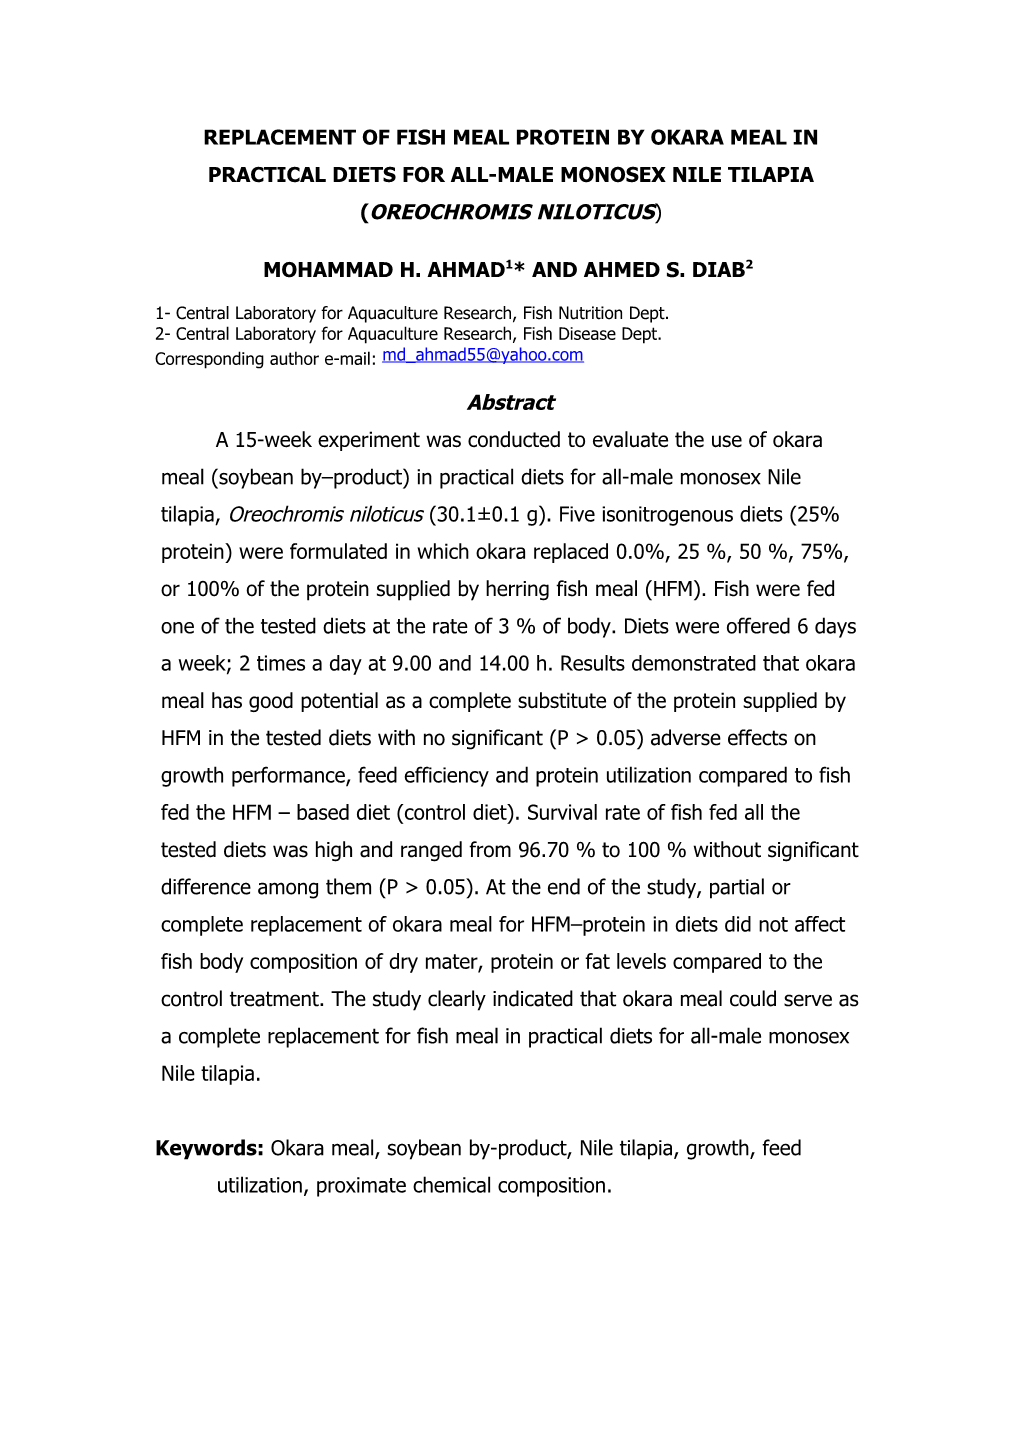 Replacement of Fish Meal Protein by Okara Meal in Practical Diets for All-Male Monosex